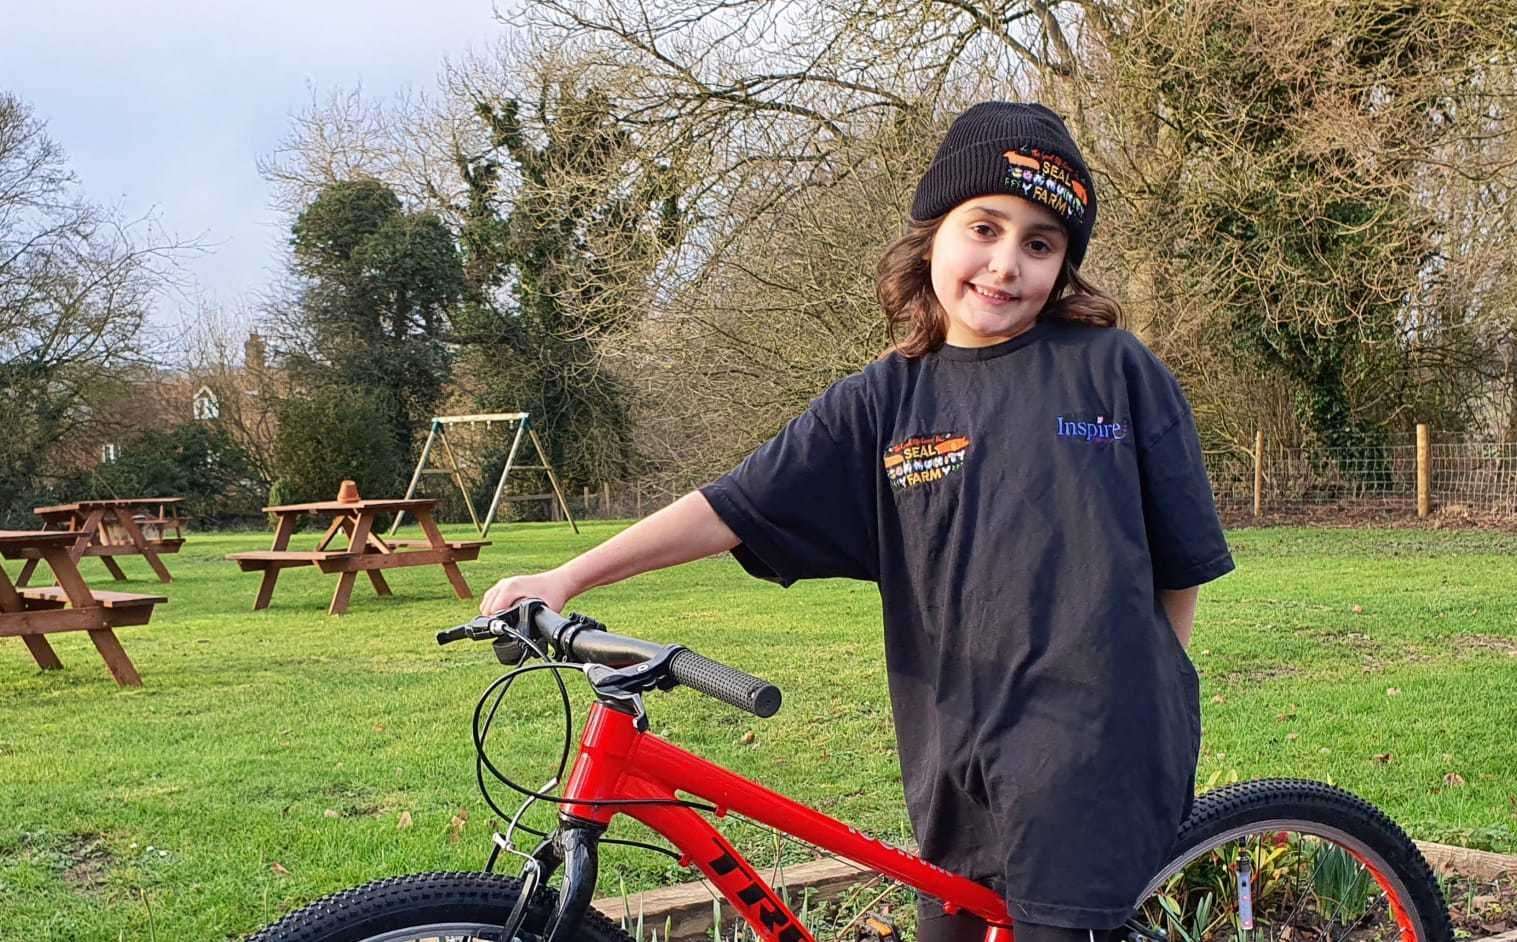 Maia has raised more than £1,000 for the farm at Seal CE Primary School while doing the challenge